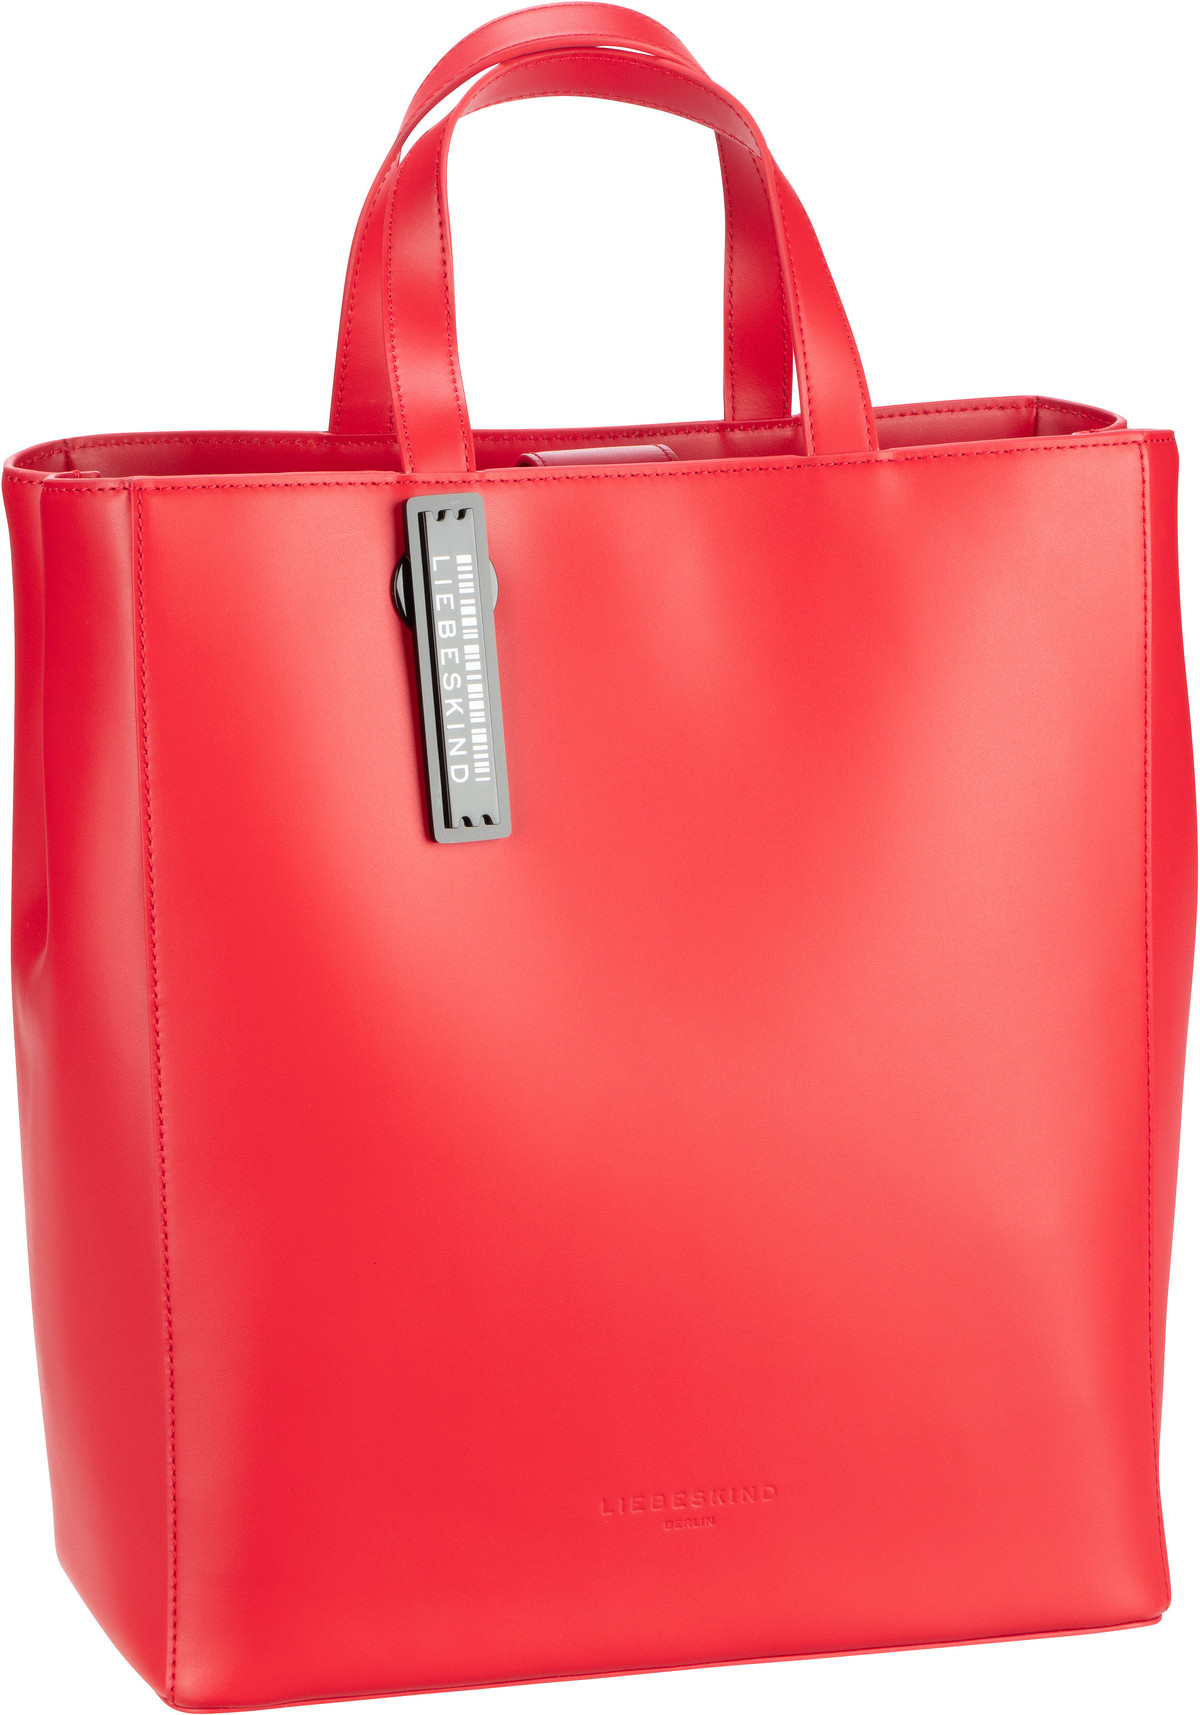 Liebeskind Berlin Paper Bag Tote M - Passion